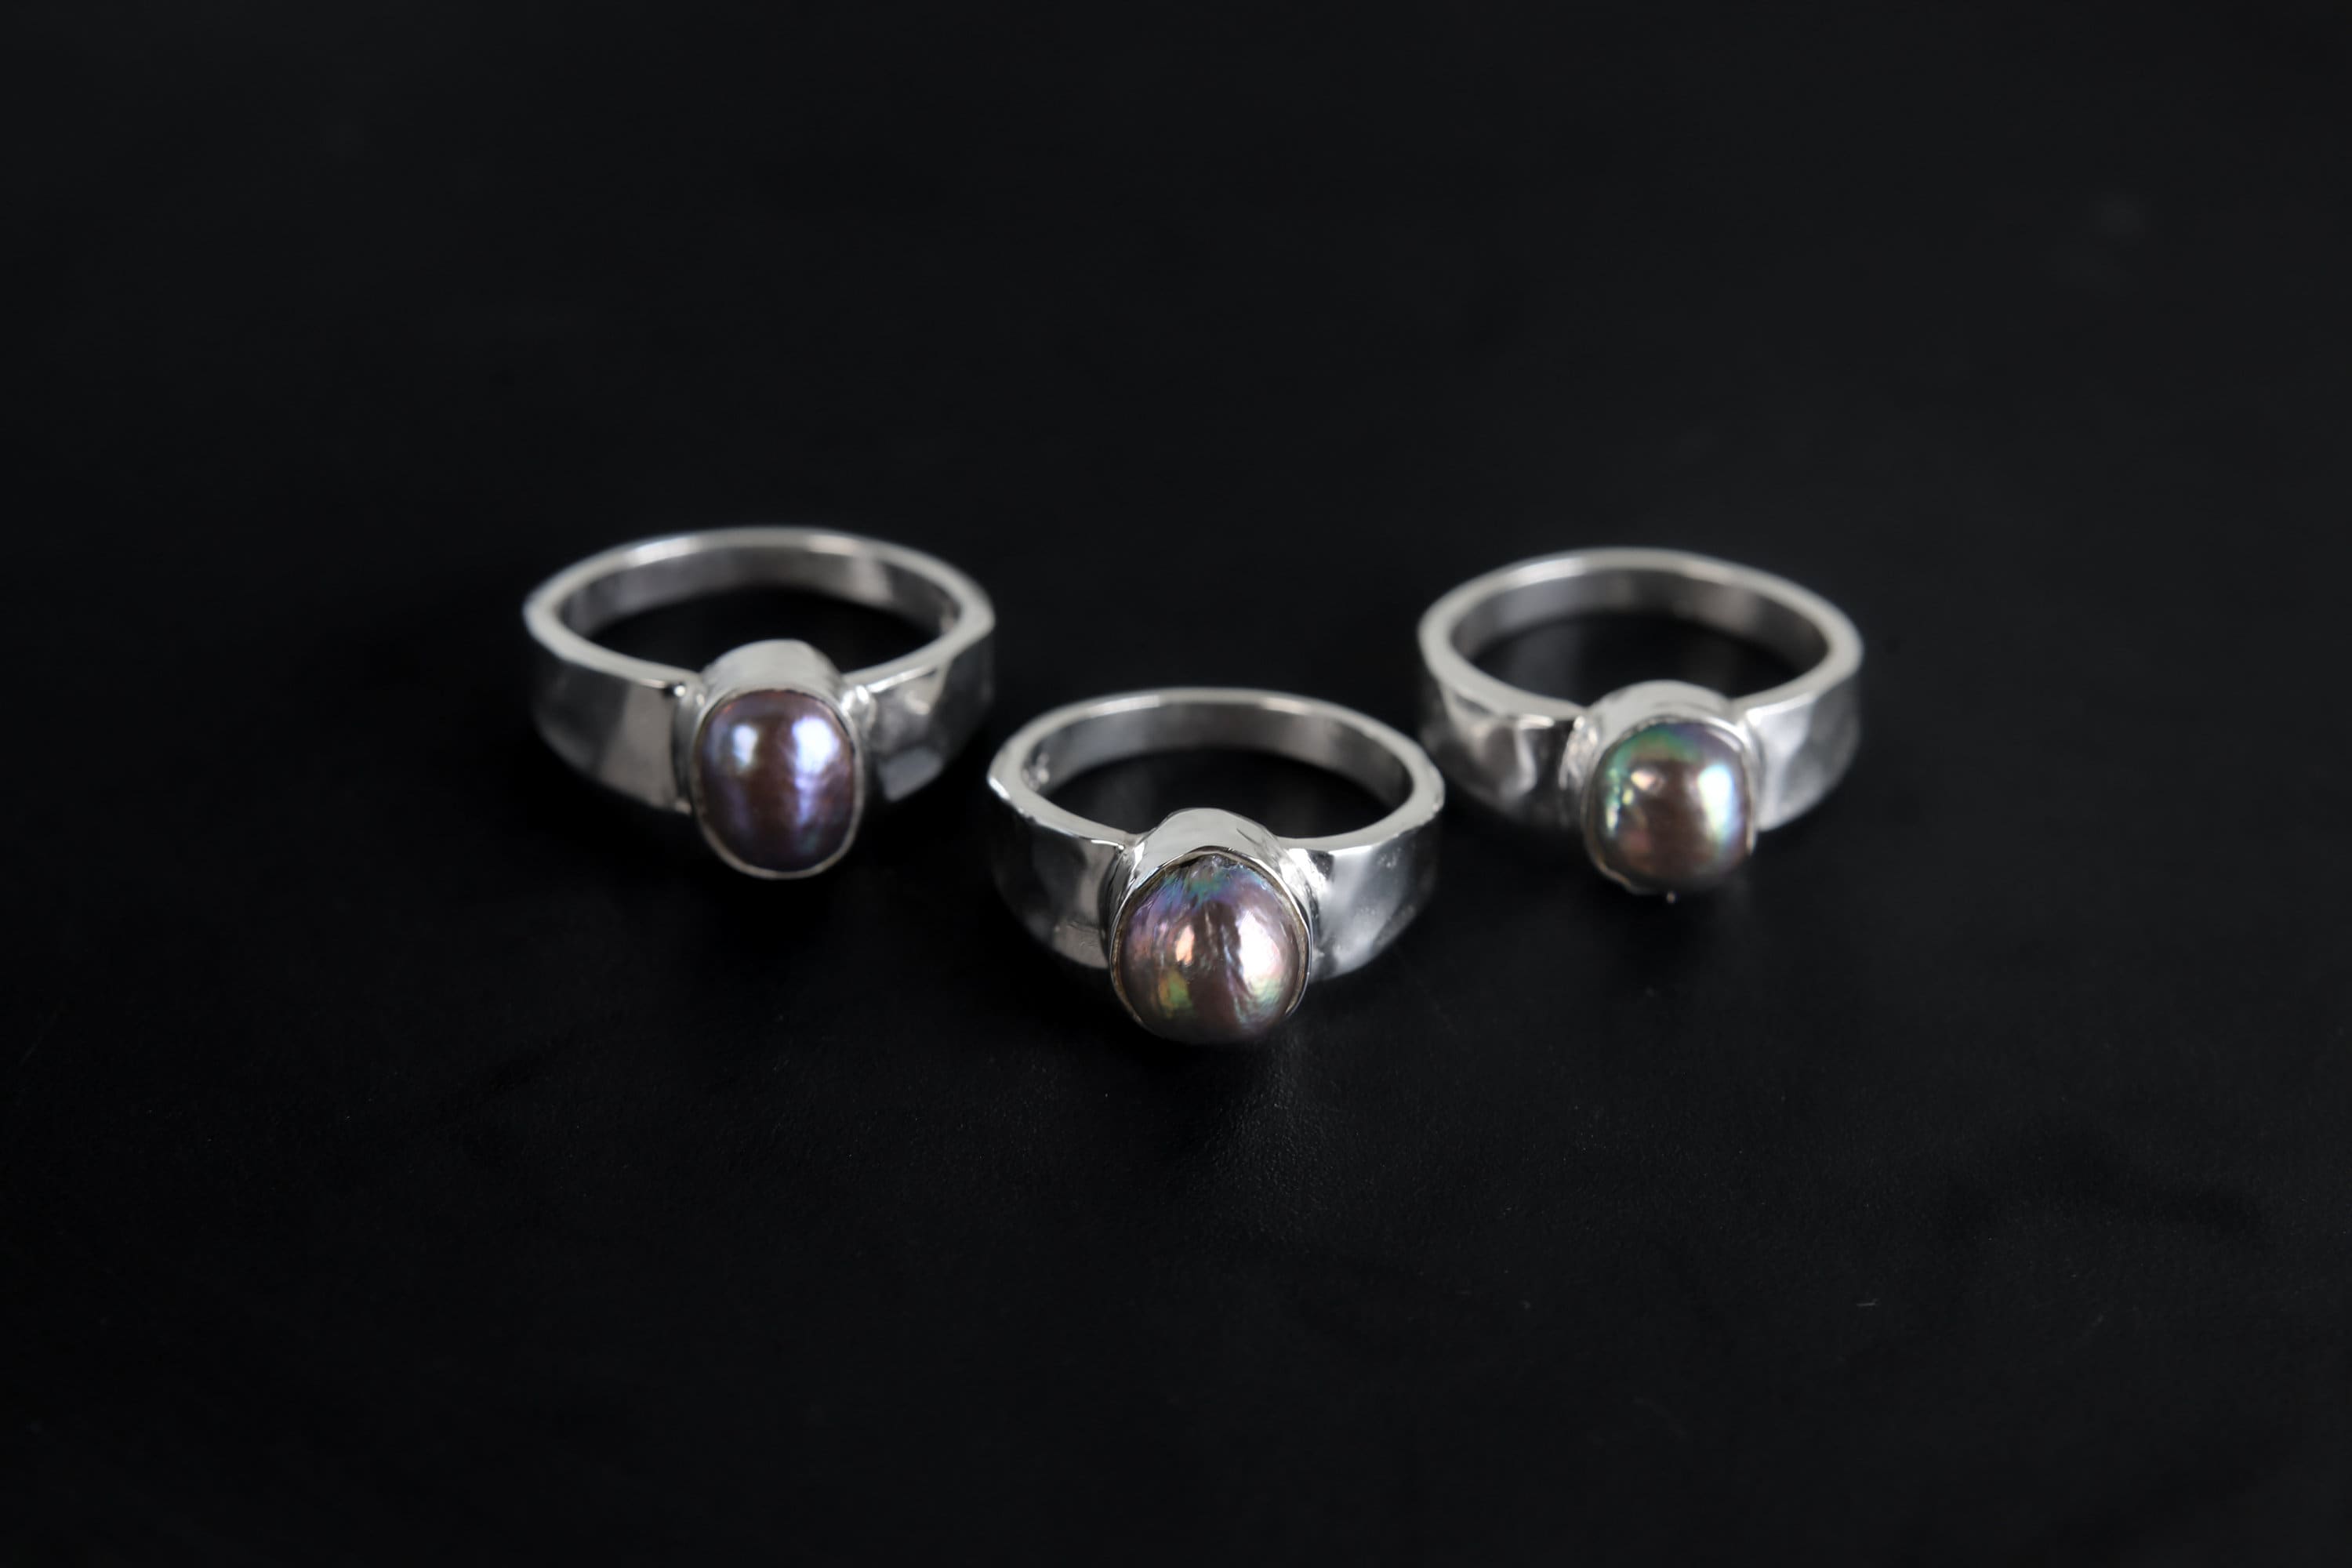 Tahitian Black Pearls with Rainbow Luster Ring - Hammered - 925 Sterling Silver Setting - Unisex - High Shine Polish - Promotes Inner Wisdom